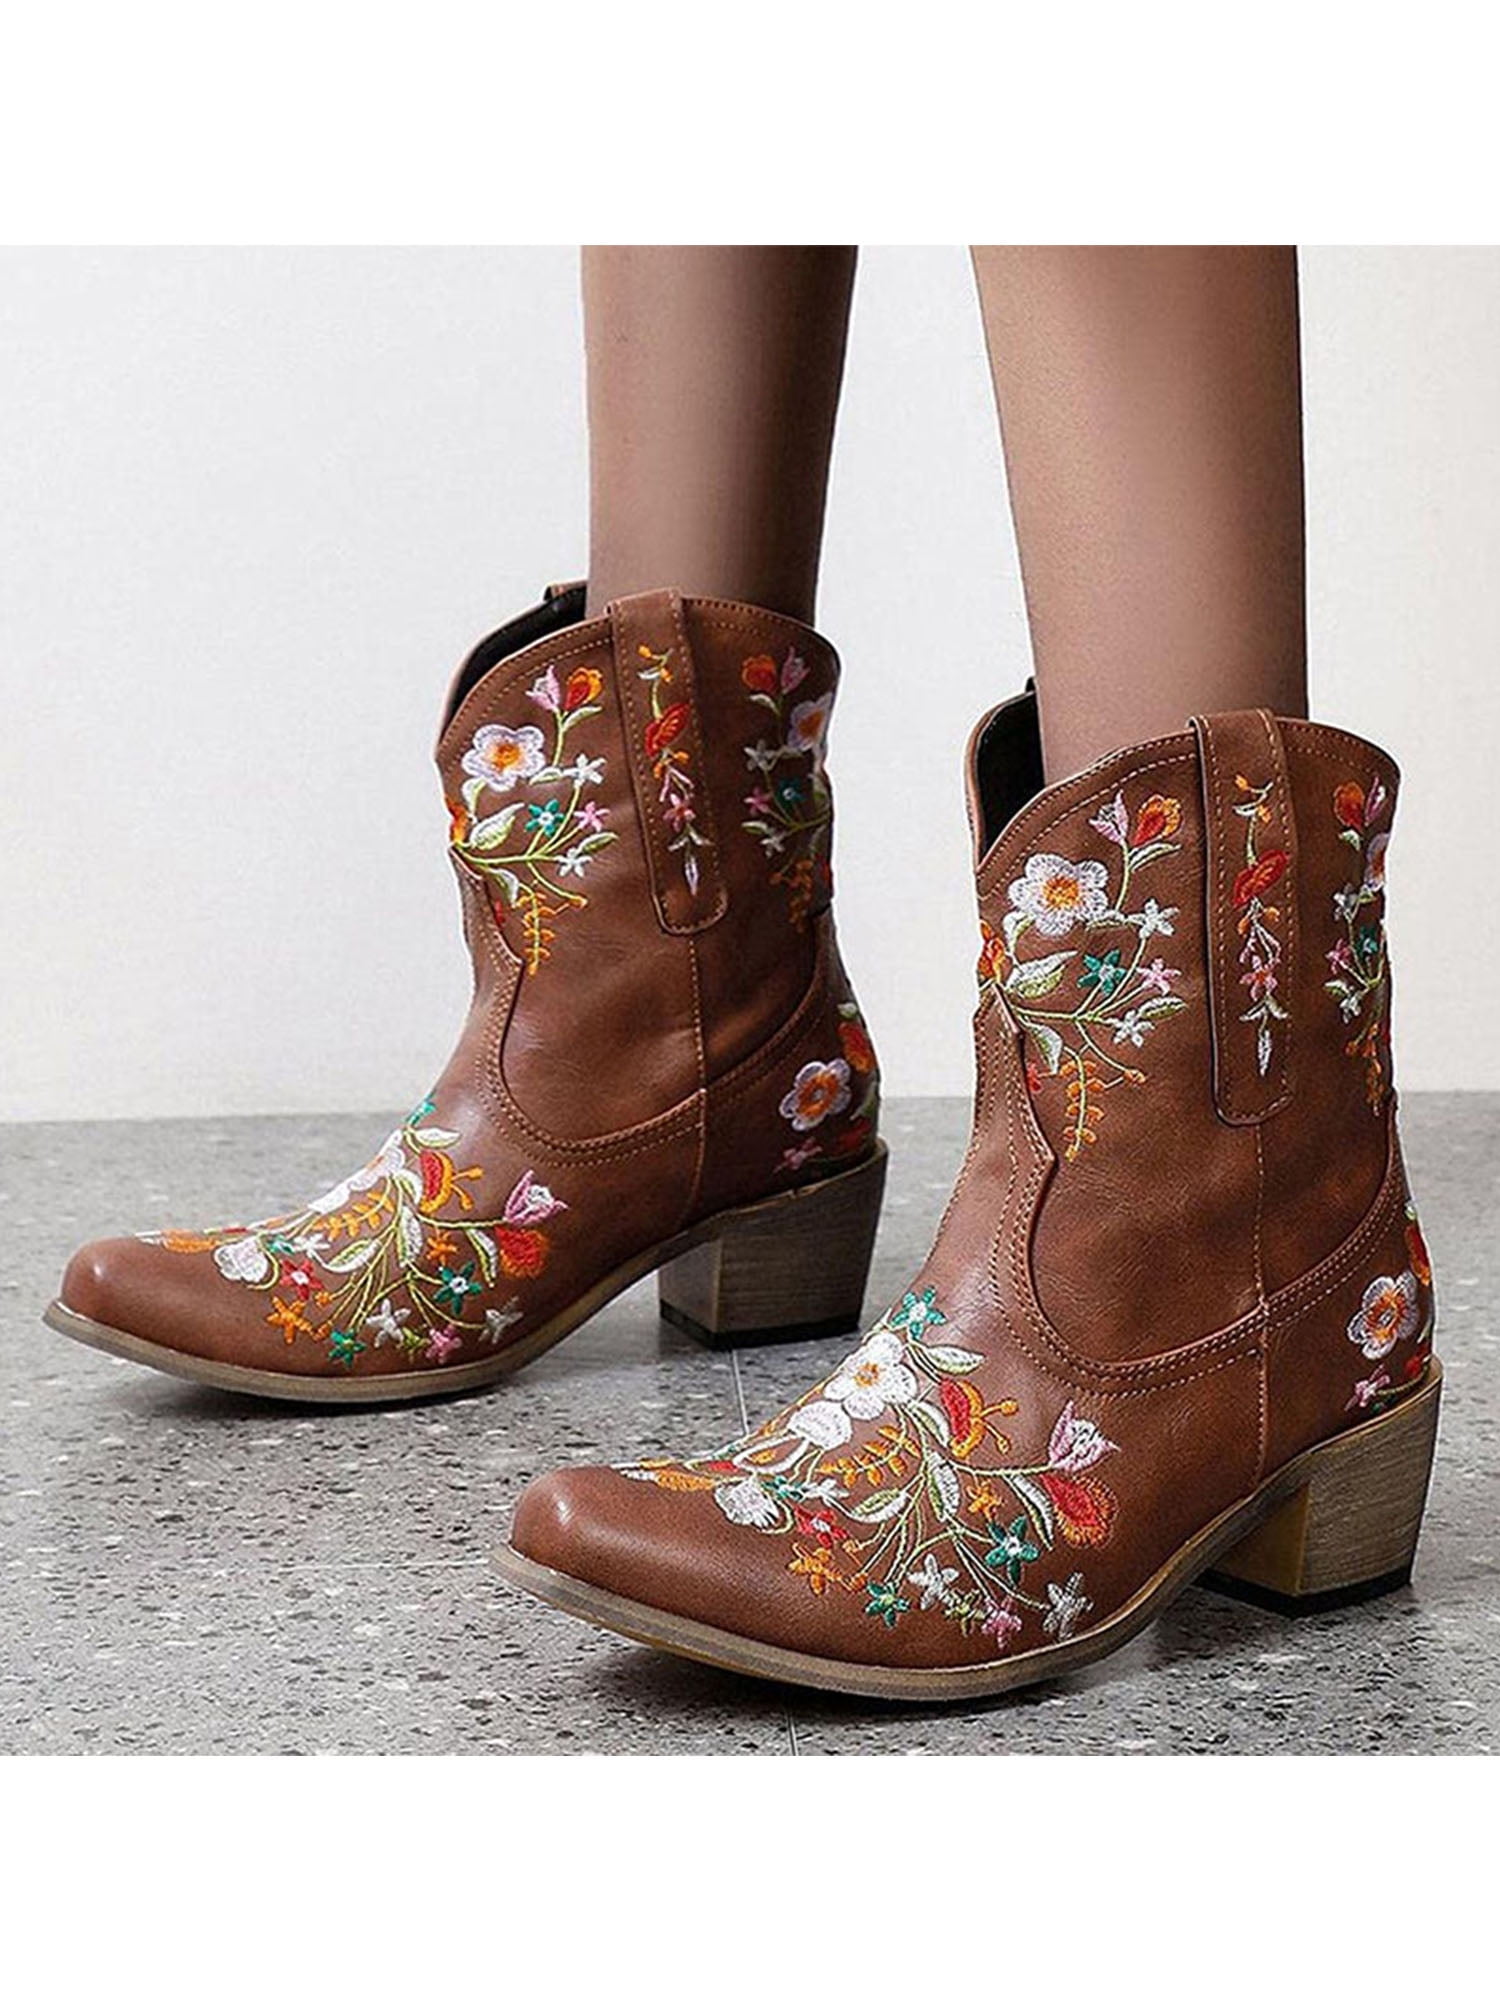 Women Wide Calf Embroidered Western Country Cowgirl Cowboy Boots Black Brown Tan